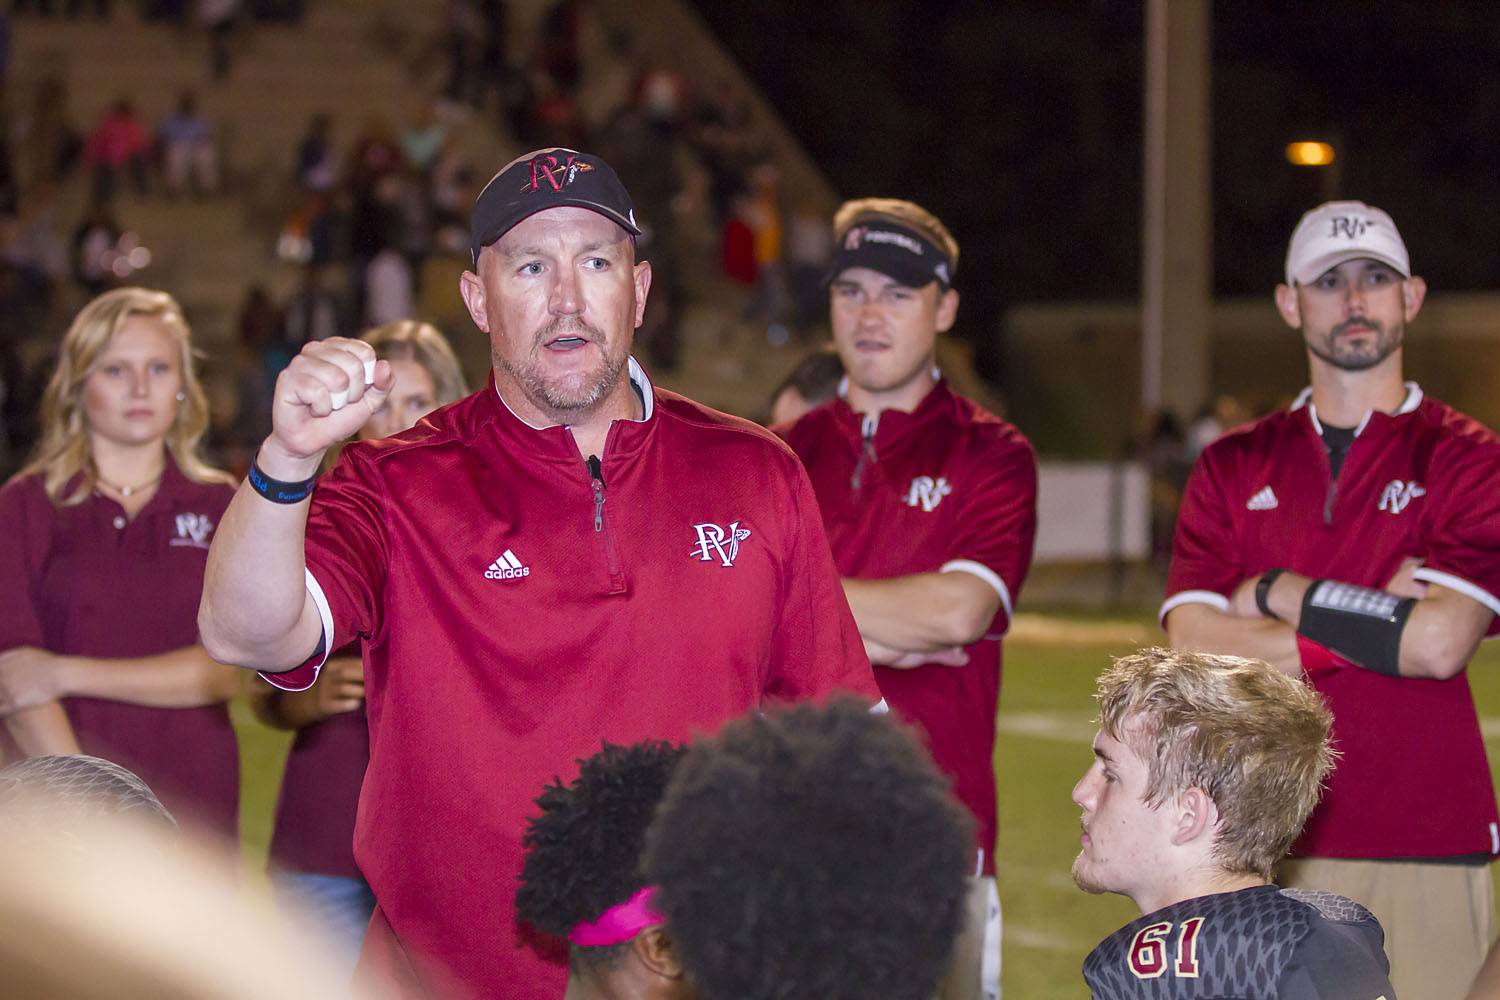 Pinson Valley's Glover cites former coaches, dad as influences